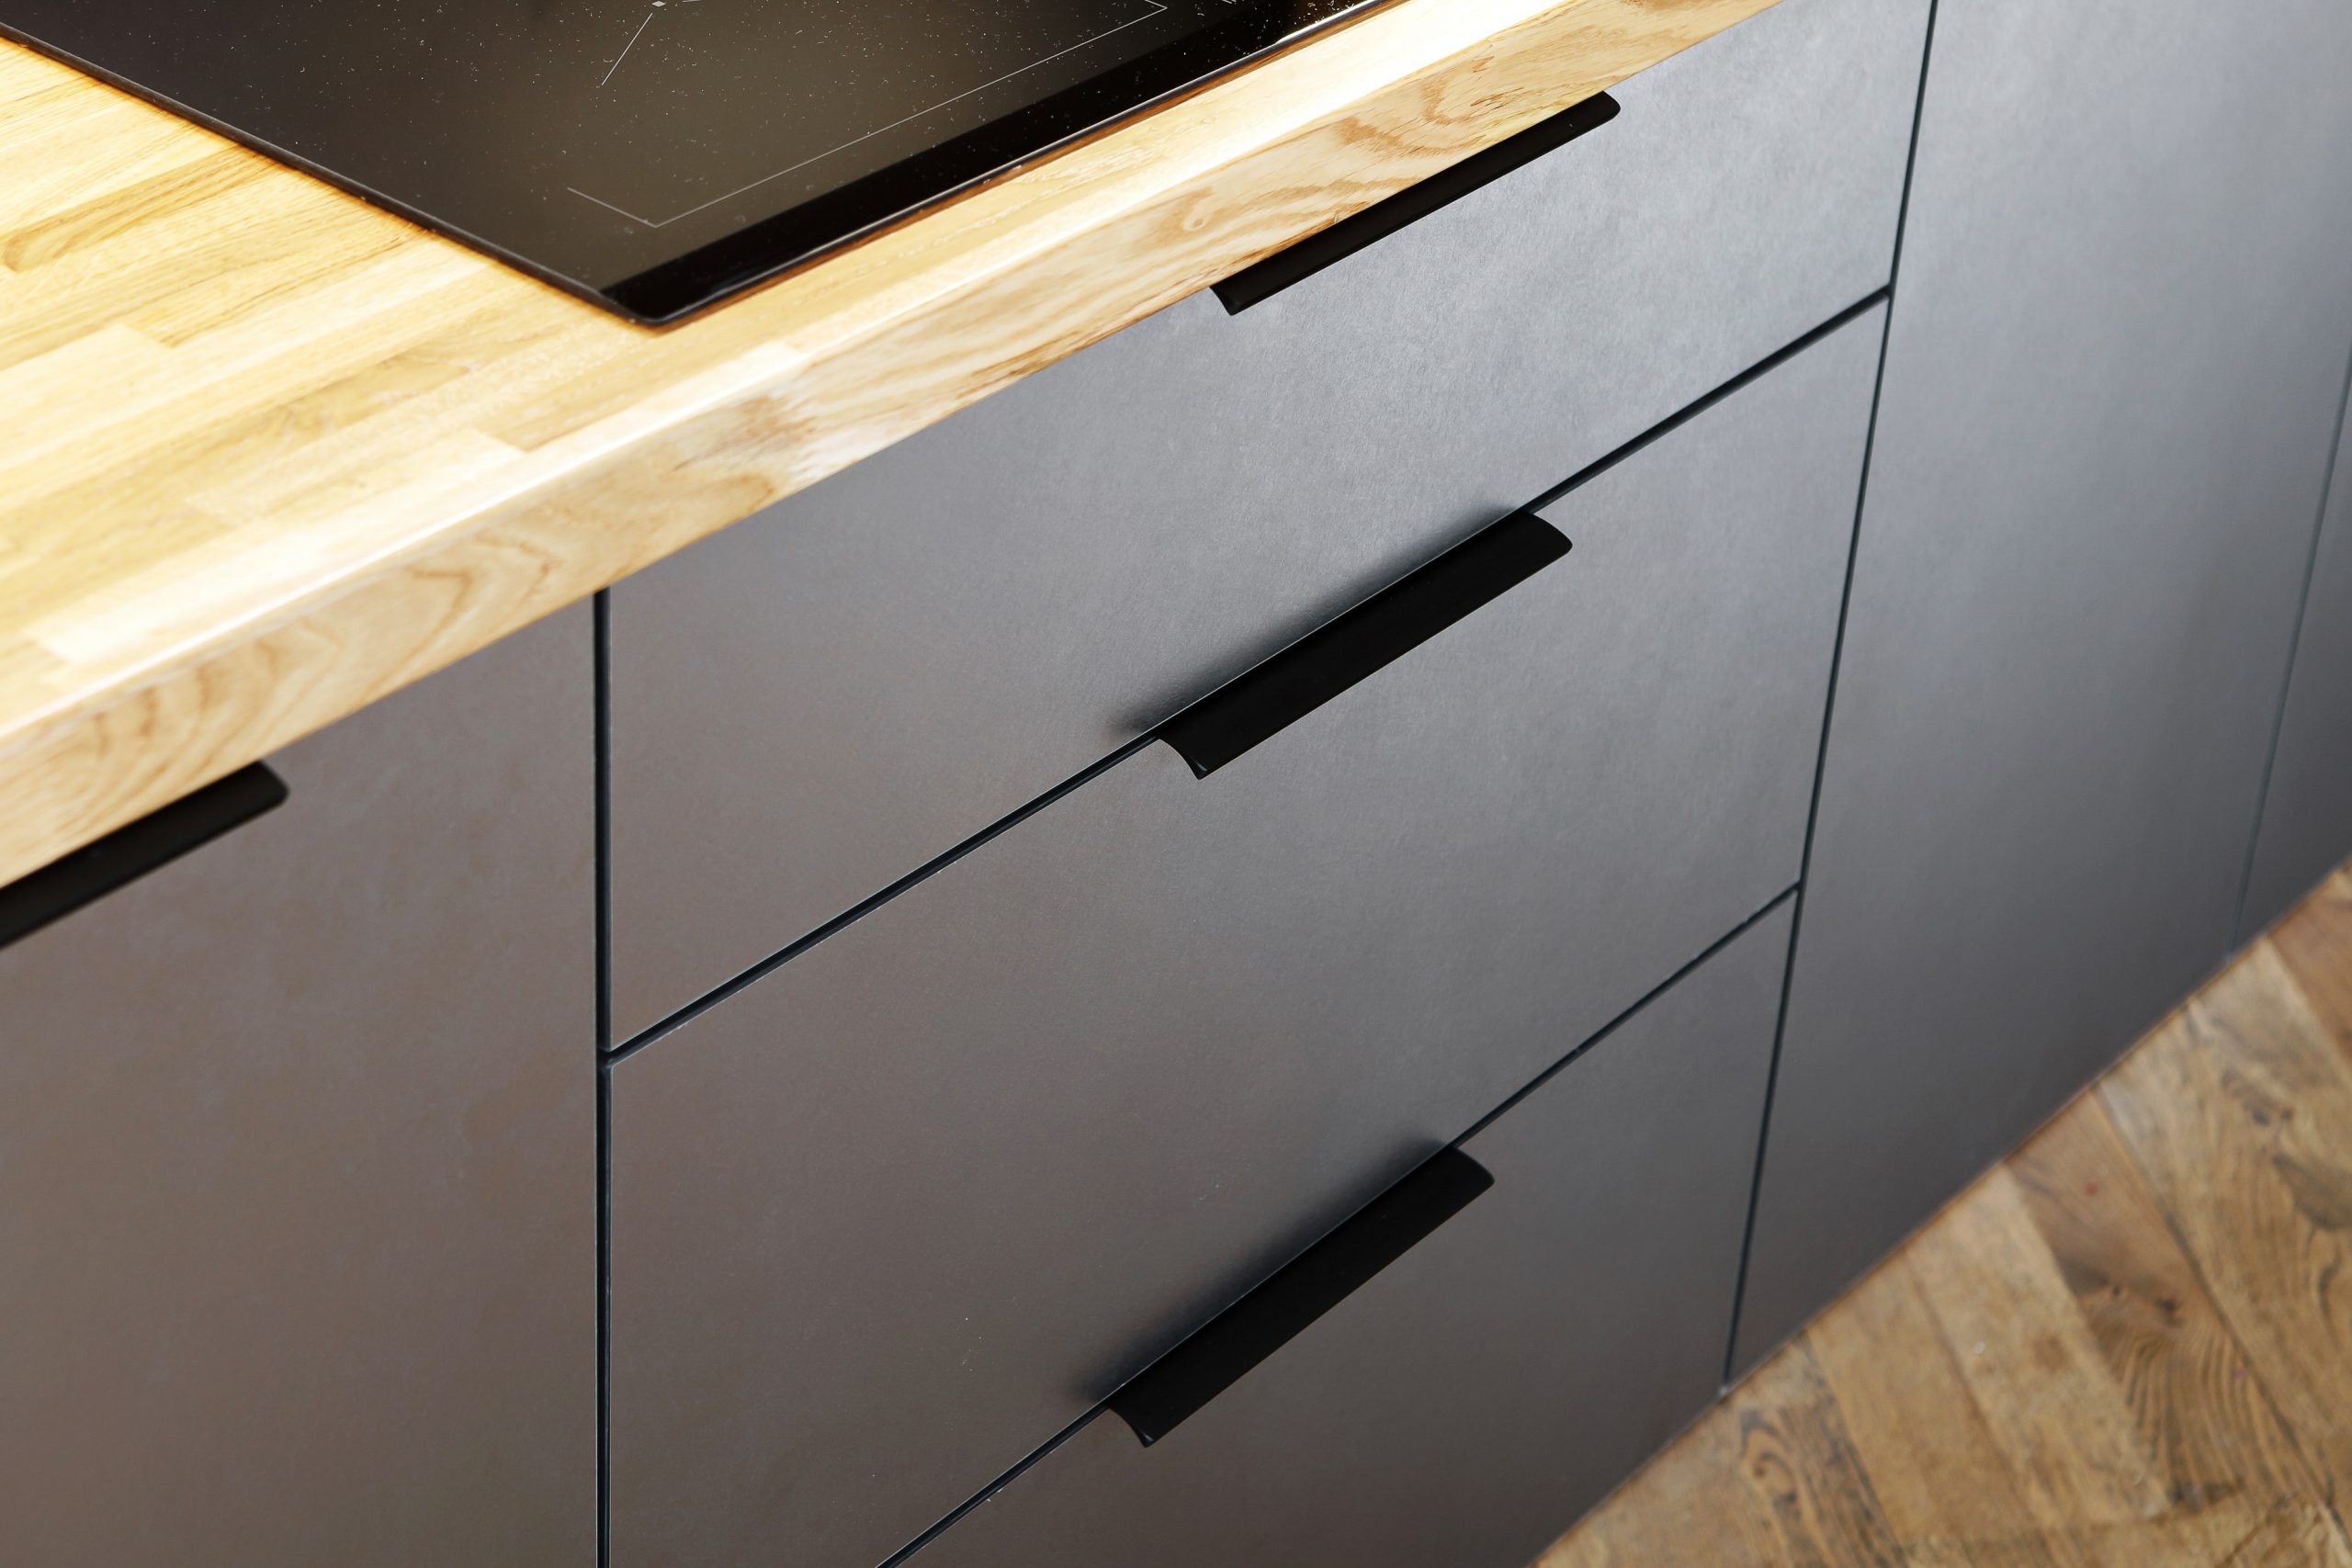 Table top and furniture handles in black